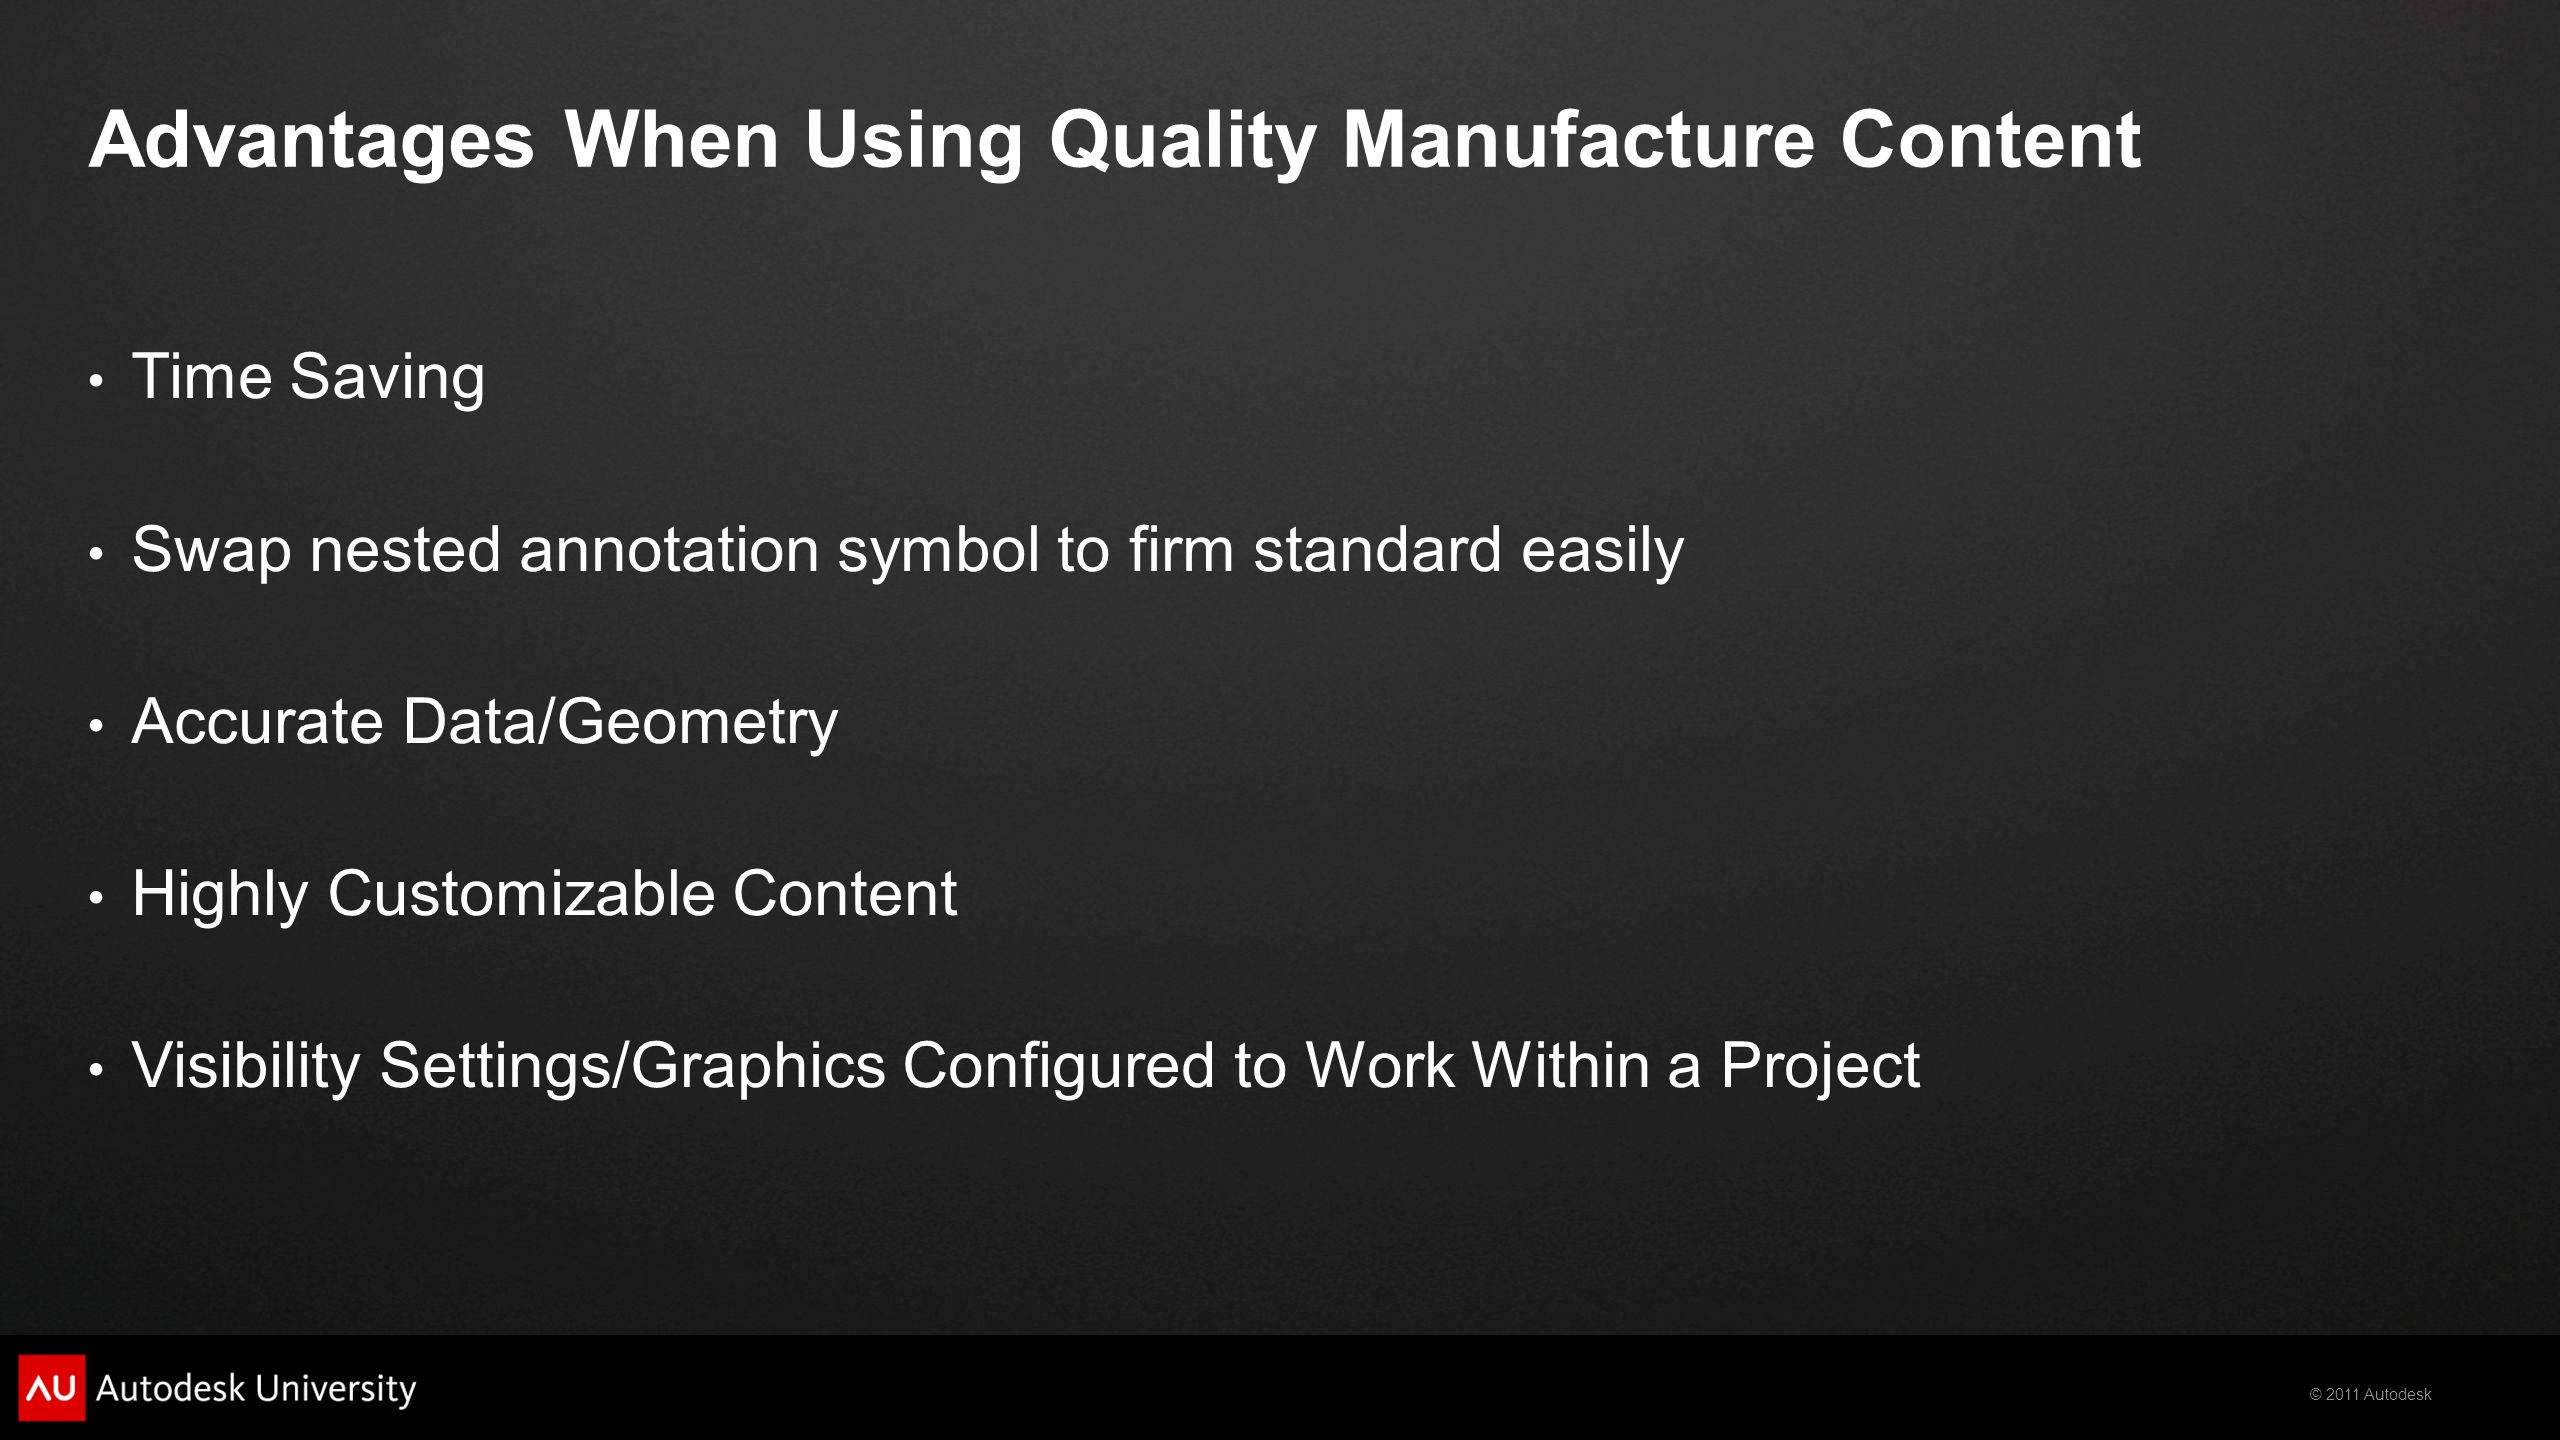 © 2011 Autodesk Advantages When Using Quality Manufacture Content Time Saving Swap nested annotation symbol to firm standard easily Accurate Data/Geometry Highly Customizable Content Visibility Settings/Graphics Configured to Work Within a Project